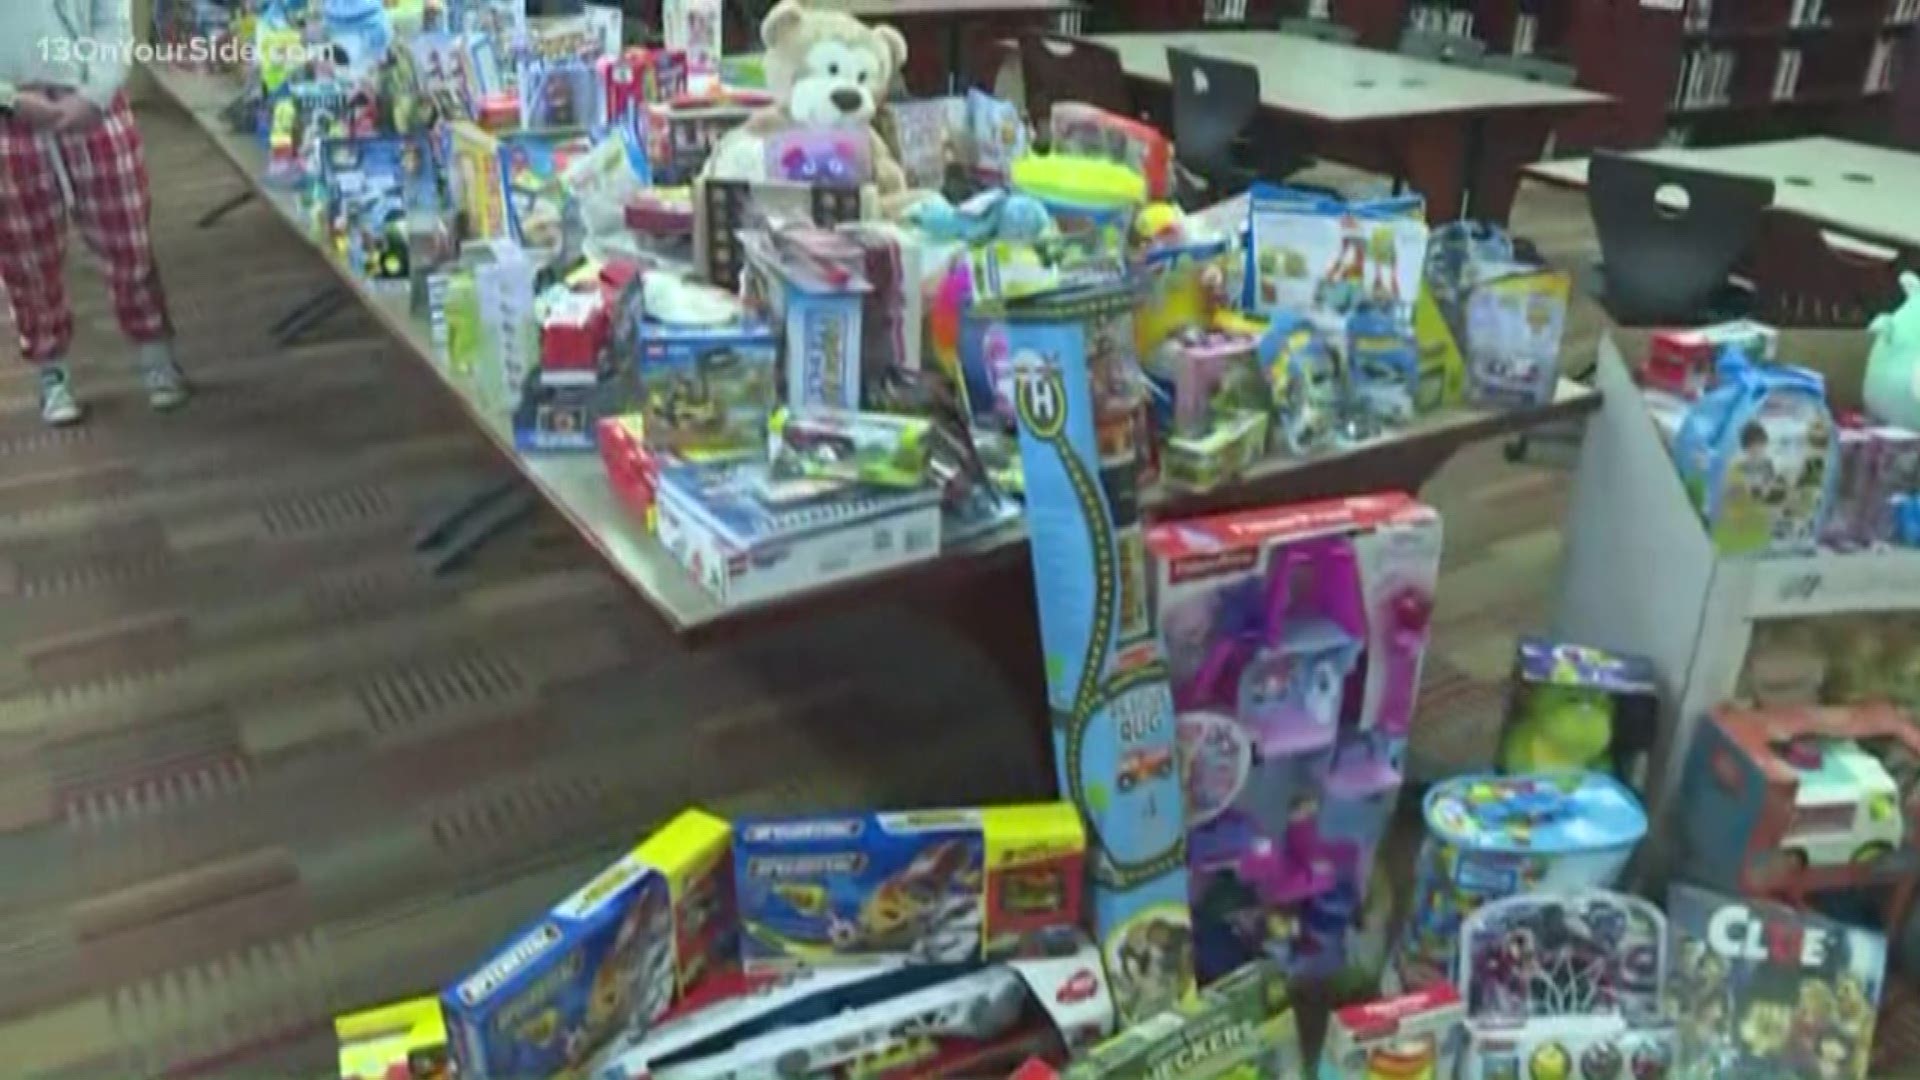 13 ON YOUR SIDE's Kristin Mazur was live at Sparta High School where students have donated tons of toys are families in need this holiday season.